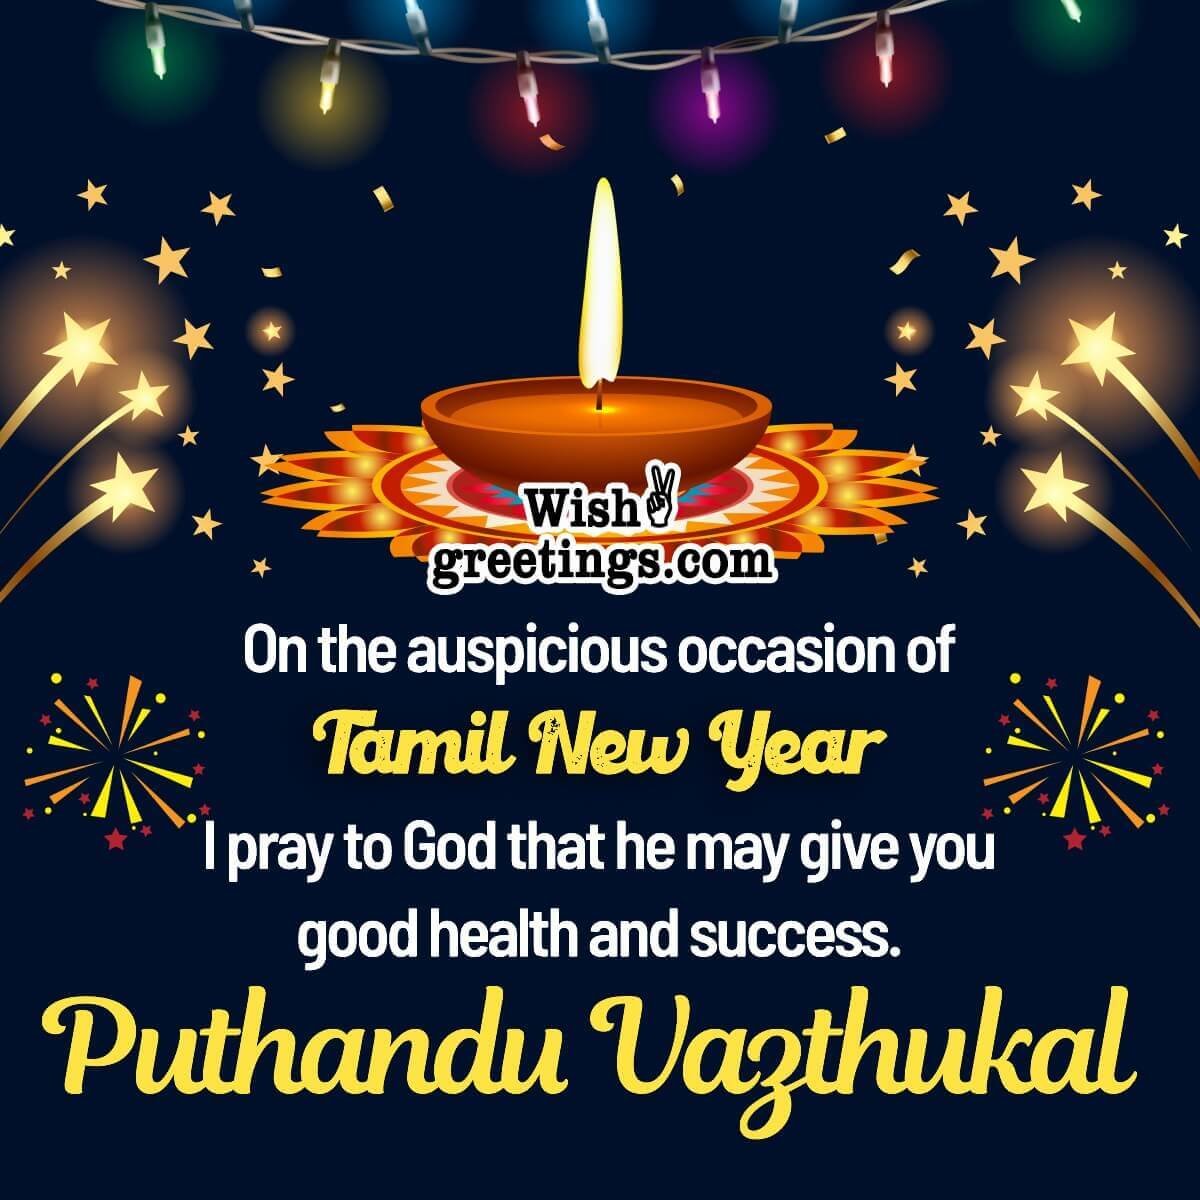 Tamil New Year Wishes Messages Wish Greetings